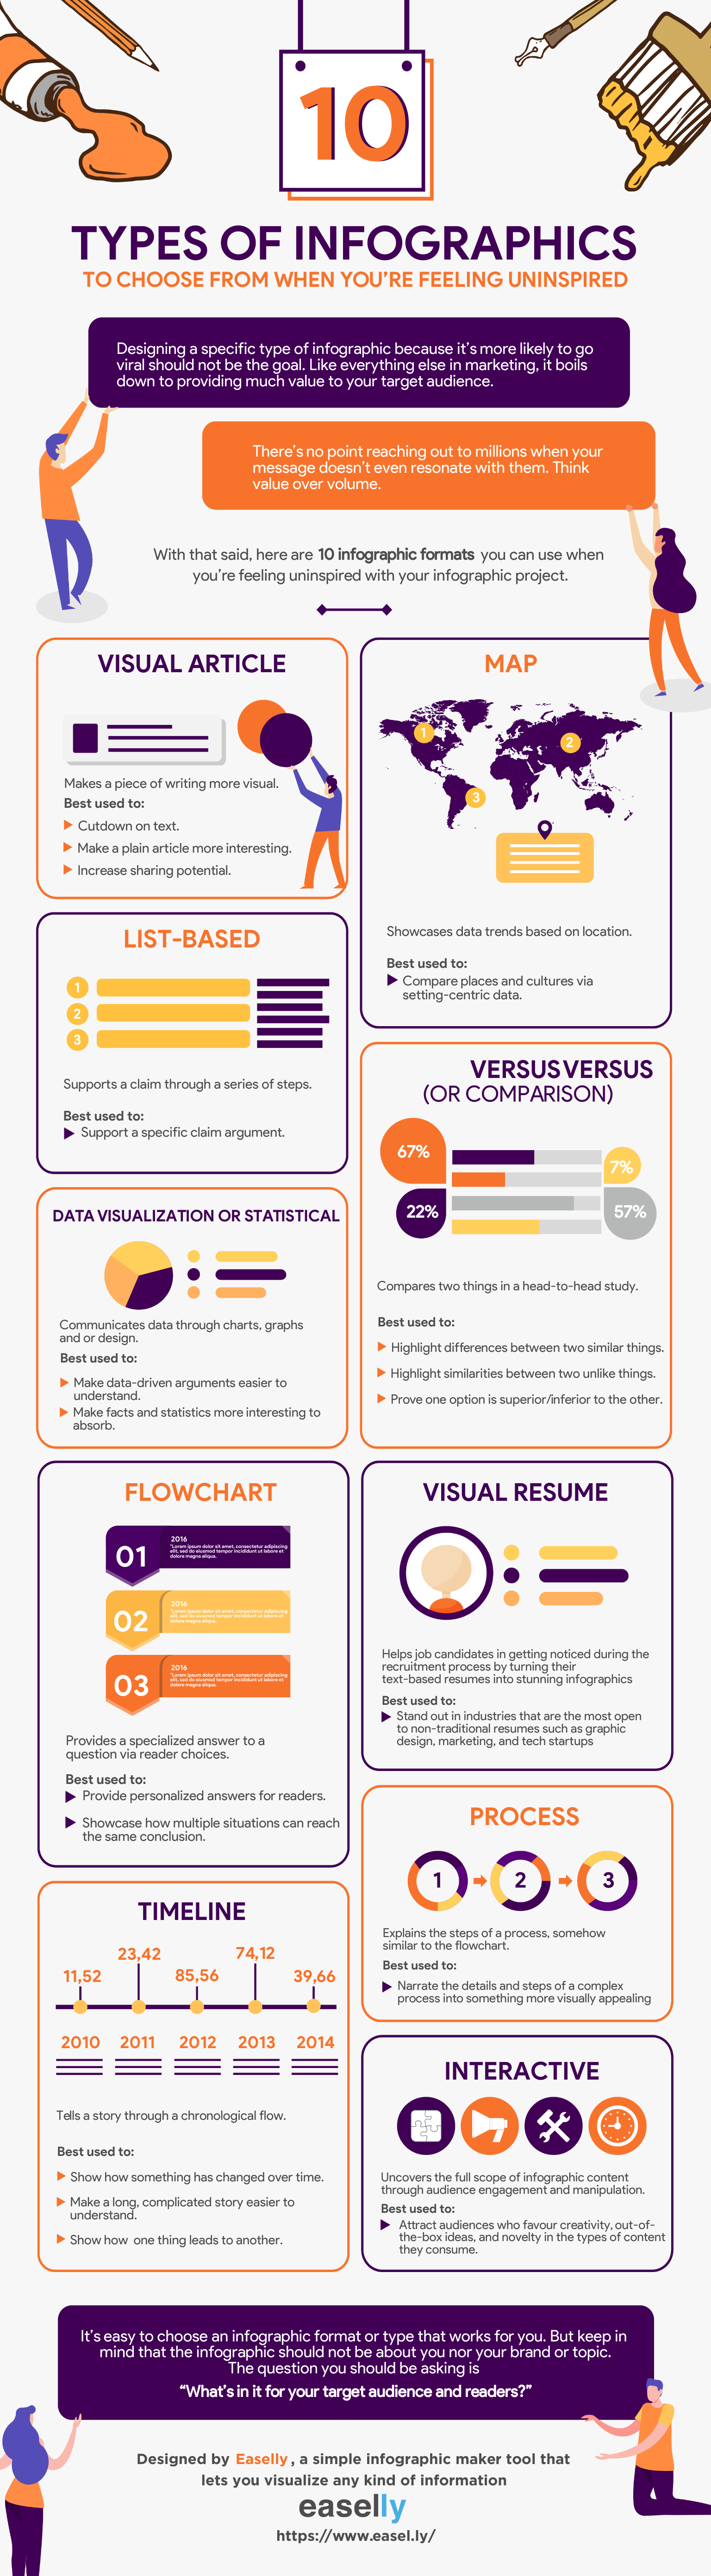 10 of the Best Infographic Designs That Will Make Your Work Easy and Attractive | Blog | Whatagraph